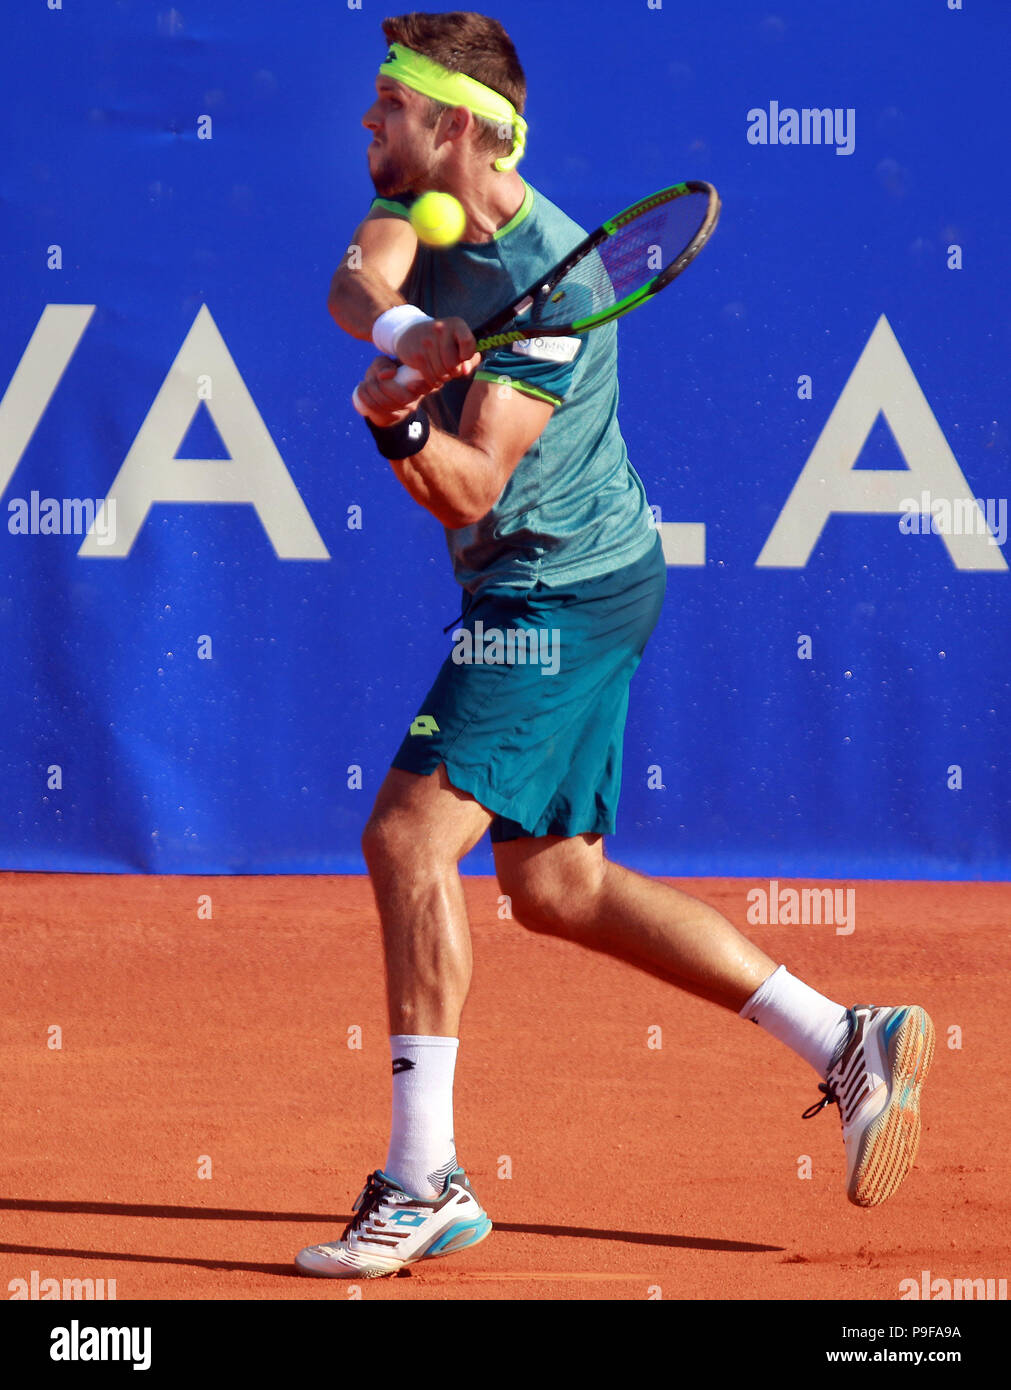 Umag, Croatia. 18th July 2018. CROATIA, Umag: Jiri Vesely hits a return to Marco Cecchinato of Italy during the singles match Vesely v Cecchinato at the ATP 29th Plava laguna Croatia Open Umag tournament at the at the Goran Ivanisevic ATP Stadium, on July 18, 2018 in Umag. Credit: Andrea Spinelli/Alamy Live News Stock Photo